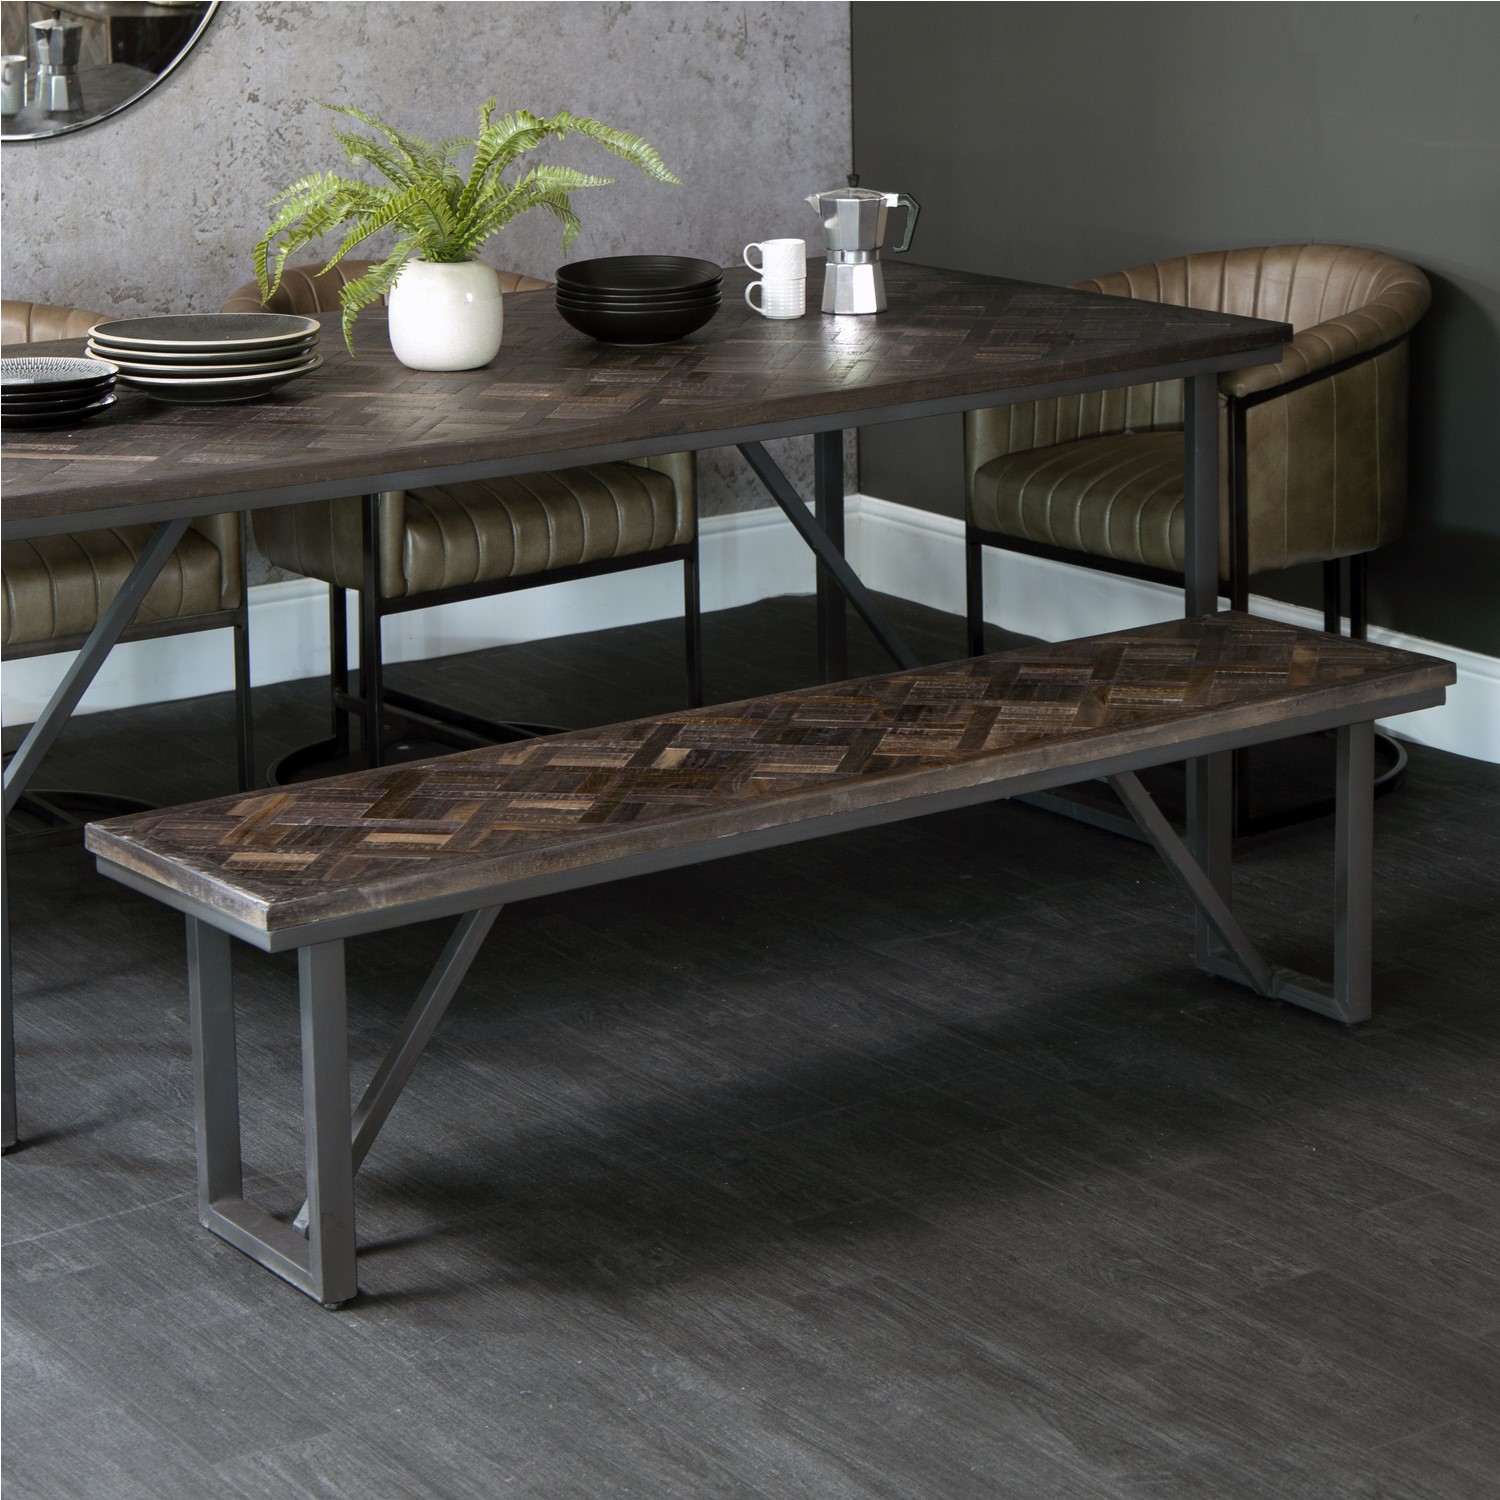 Read more about Large industrial style teak & iron dining bench 1.6m